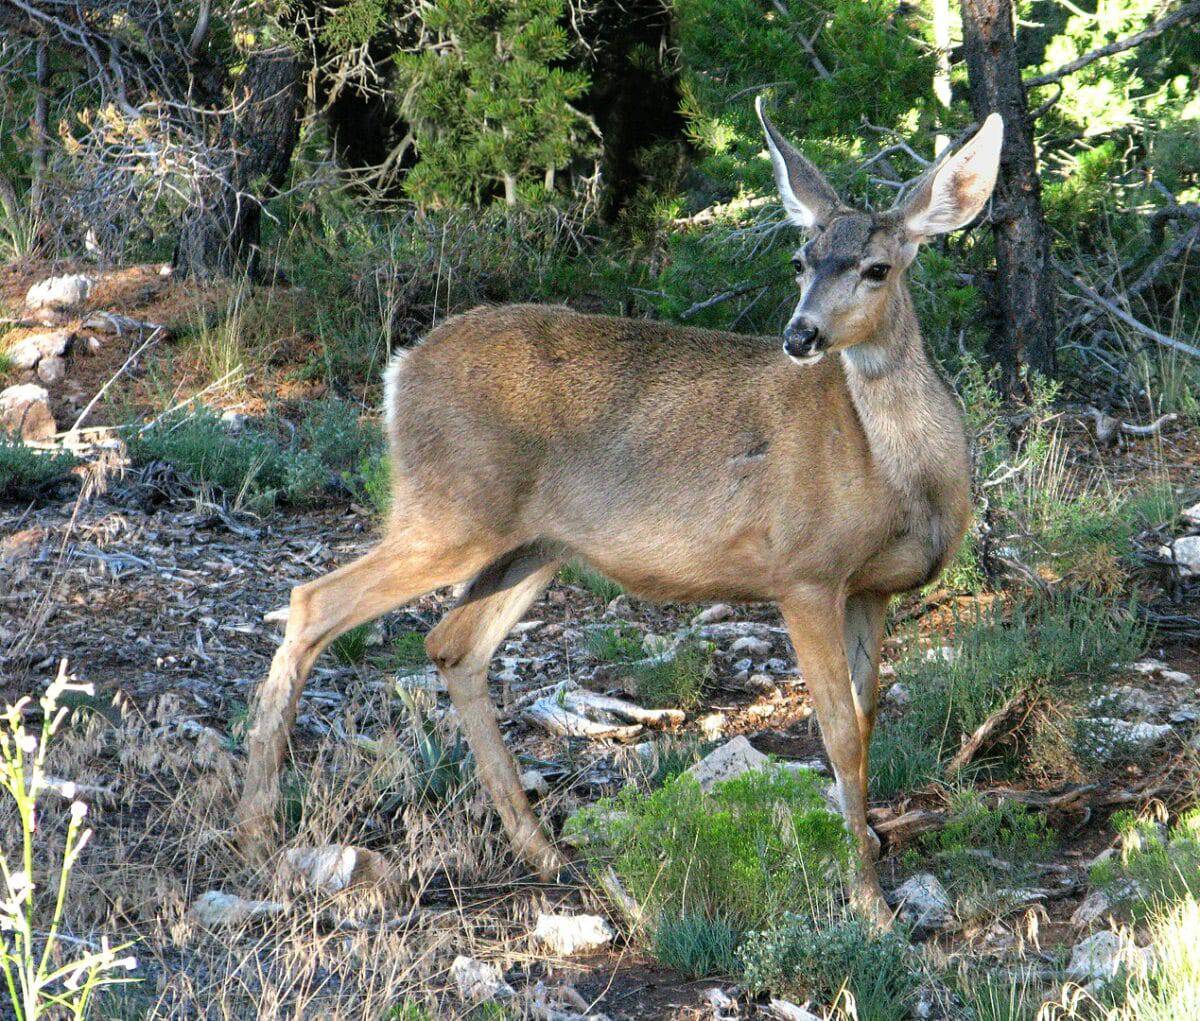 Mule deer, are among the most readily seen mammals on the South Rim of Grand Canyon National Park.